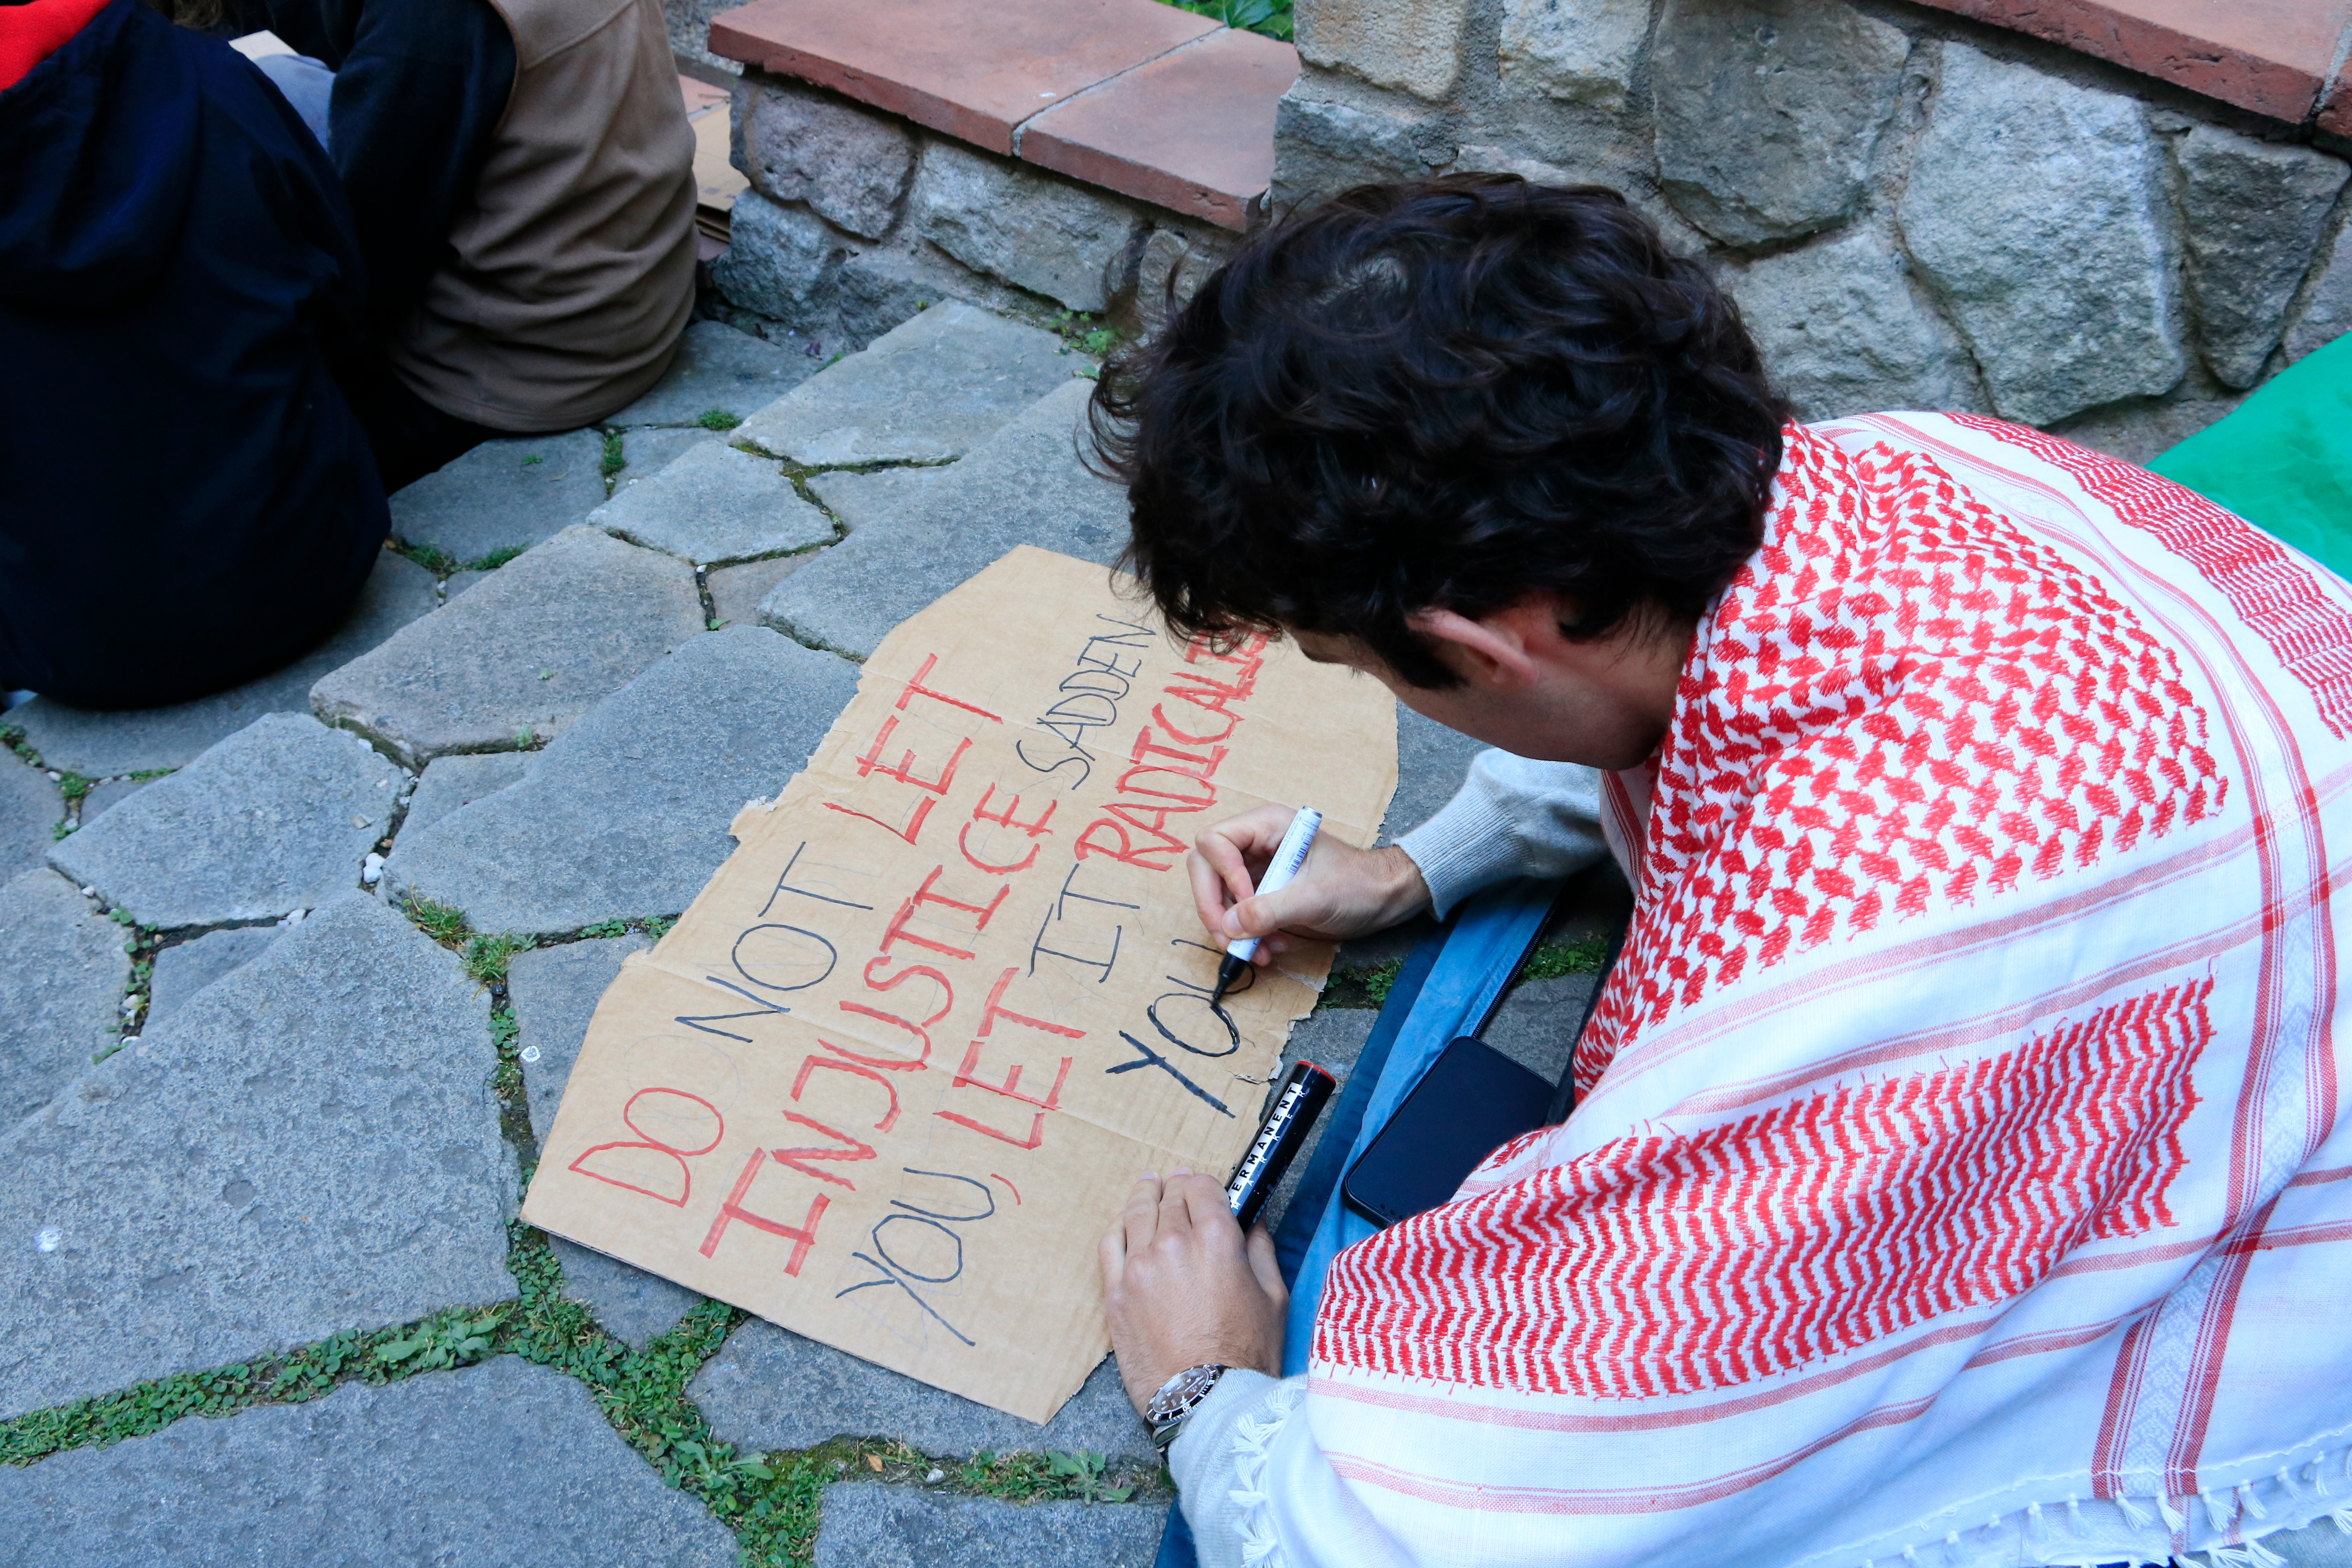 A student wearing a Palestinian keffiyeh scarf writing a poster after spending the night at the University of Barcelona cloister on May 7, 2024